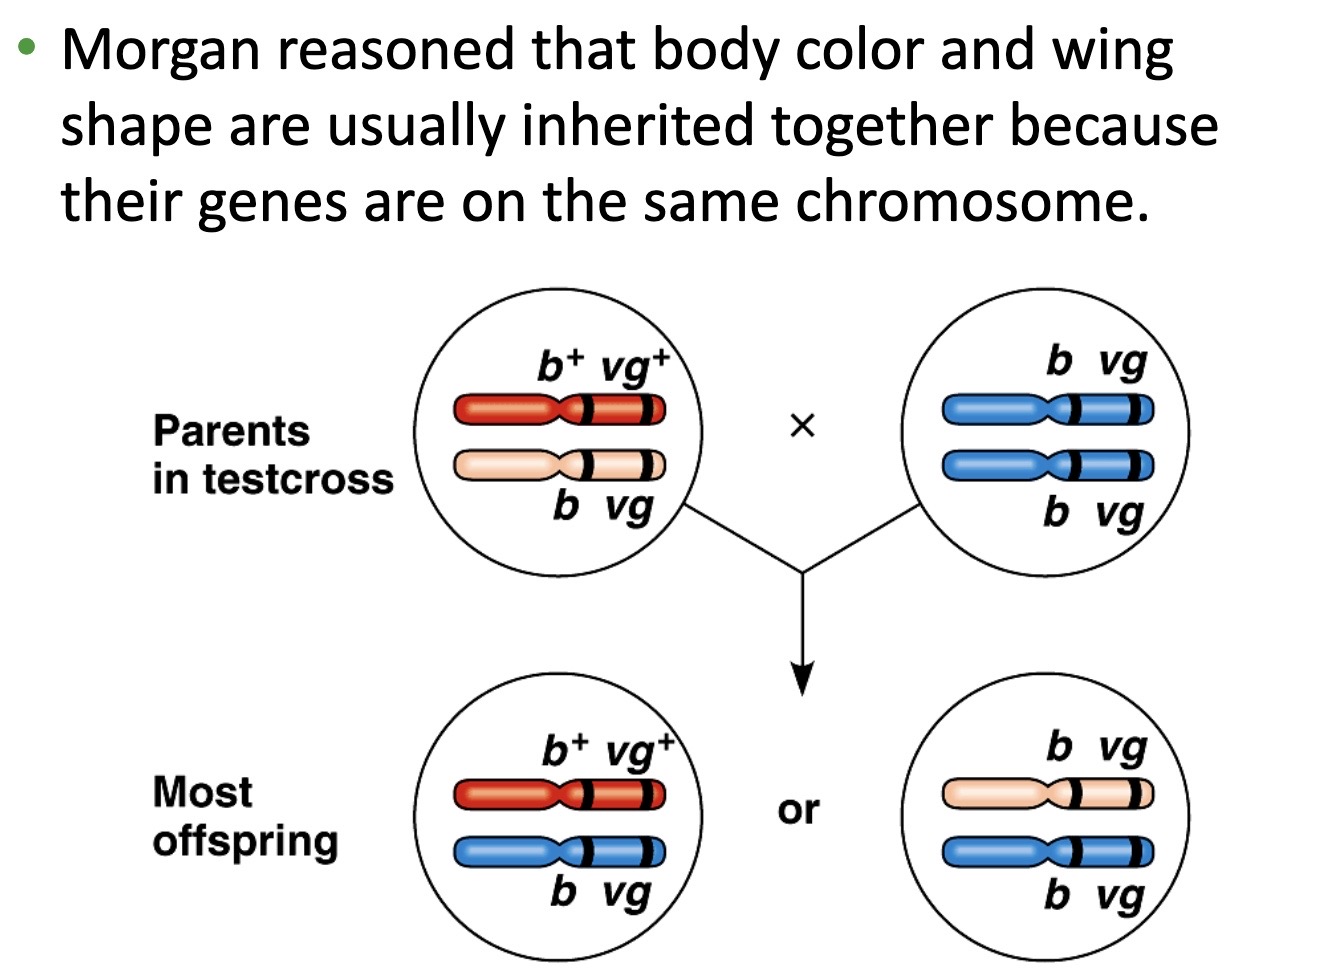 <p>This occurs due to <strong>linkage</strong>.</p><p>Linkage refers to the phenomenon where genes that are located close to each other on the same chromosome tend to be inherited together more frequently than predicted by Mendel&apos;s laws. This occurs because the closer two genes are on a chromosome, the less likely they are to undergo independent assortment during meiosis. As a result, the expected ratios of offspring predicted by Punnett squares may not be observed.</p><p>See image for an example.</p>